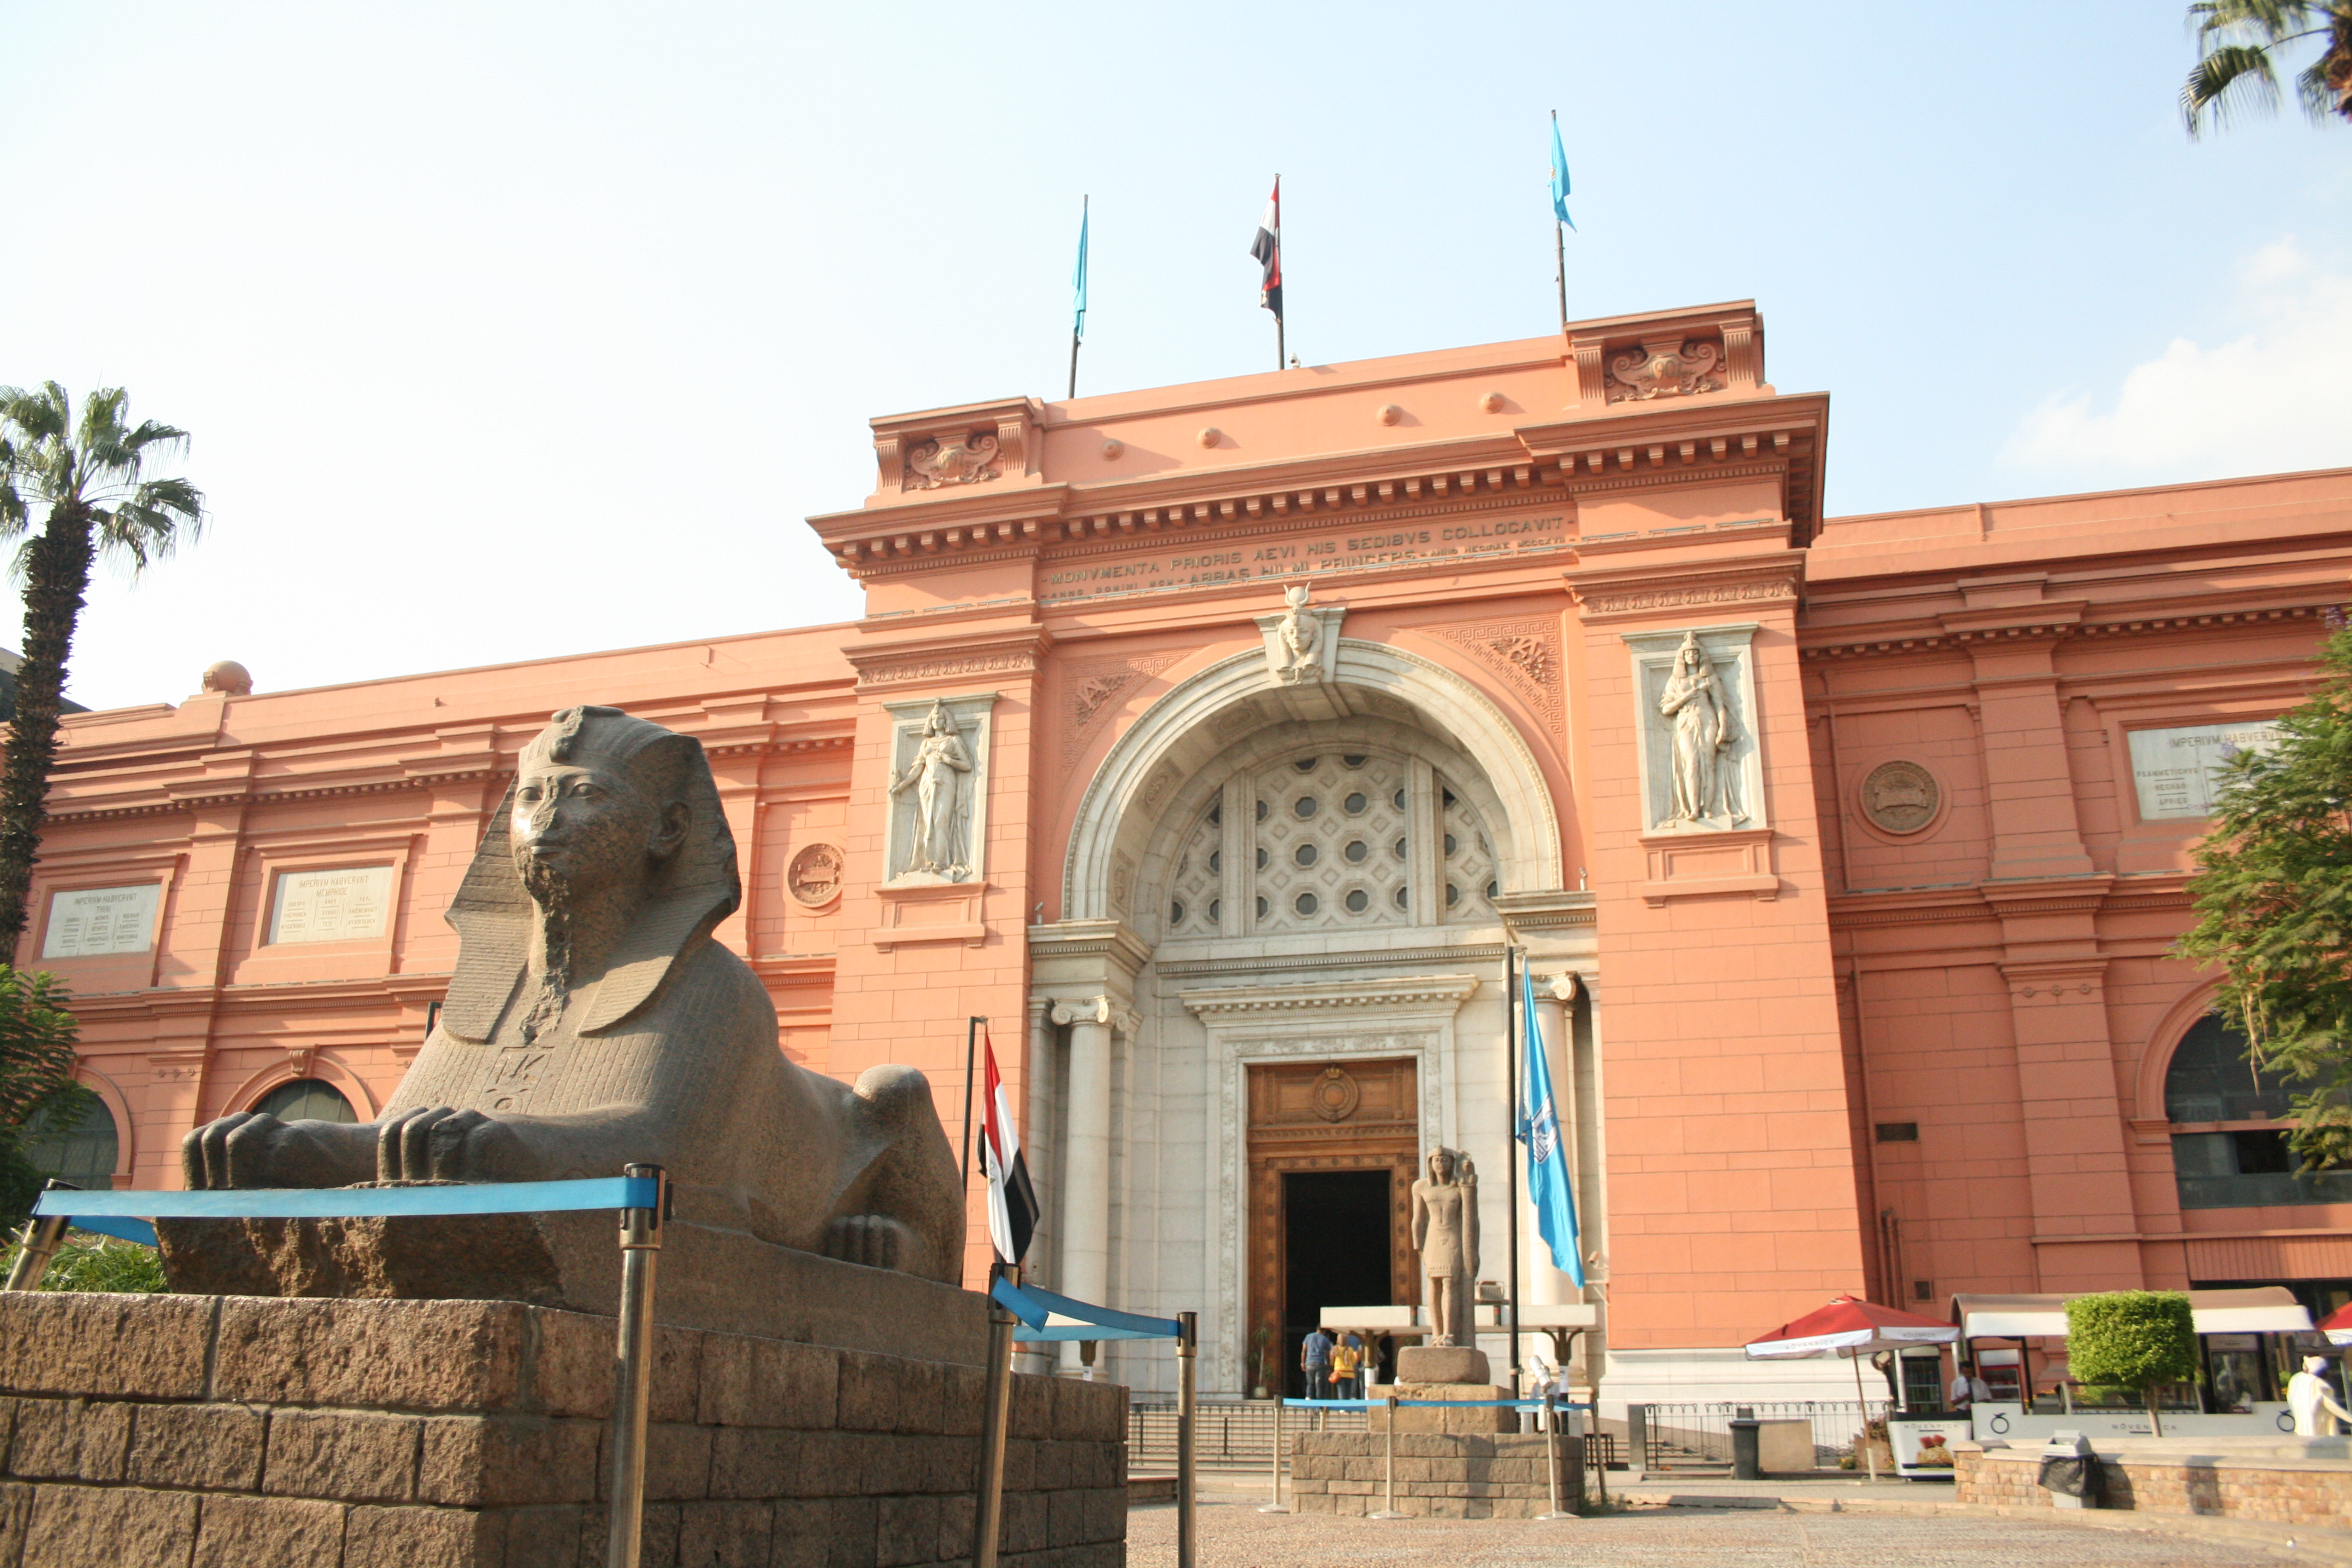 THE EGYPTIAN MUSEUM